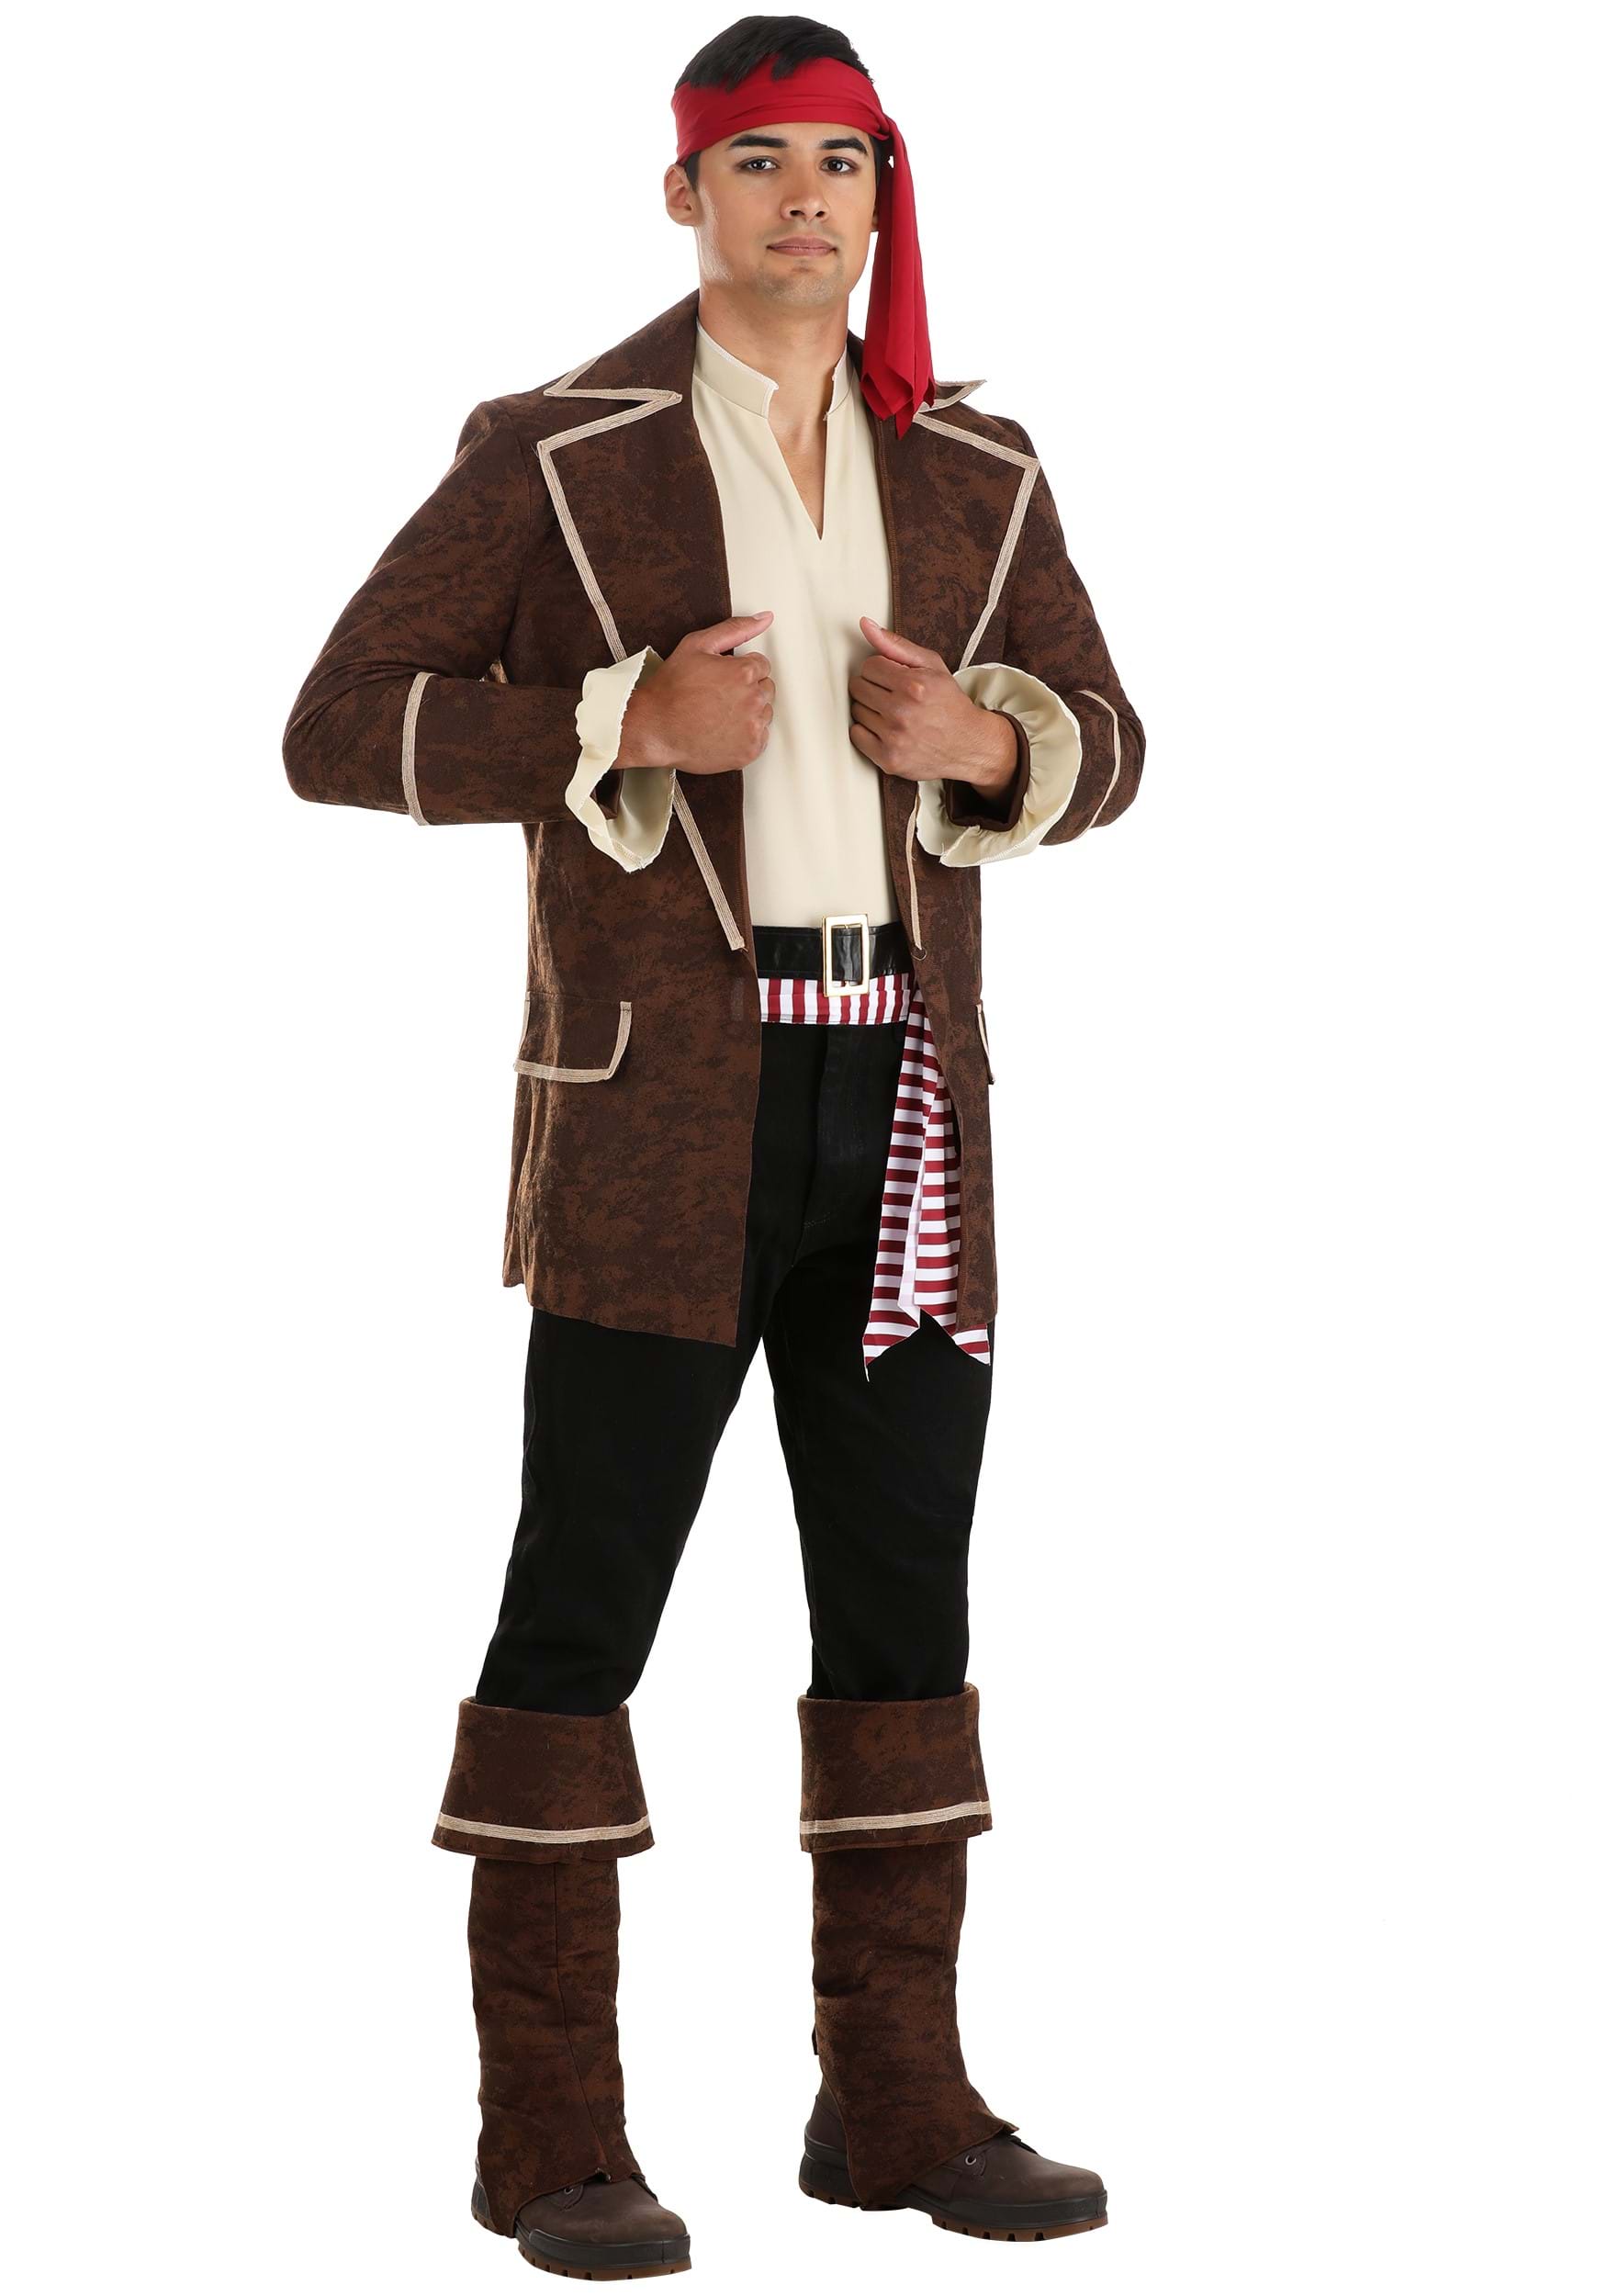 Photos - Fancy Dress FUN Costumes Plunderous Pirate Adult Costume Brown/Yellow/Red FUN1